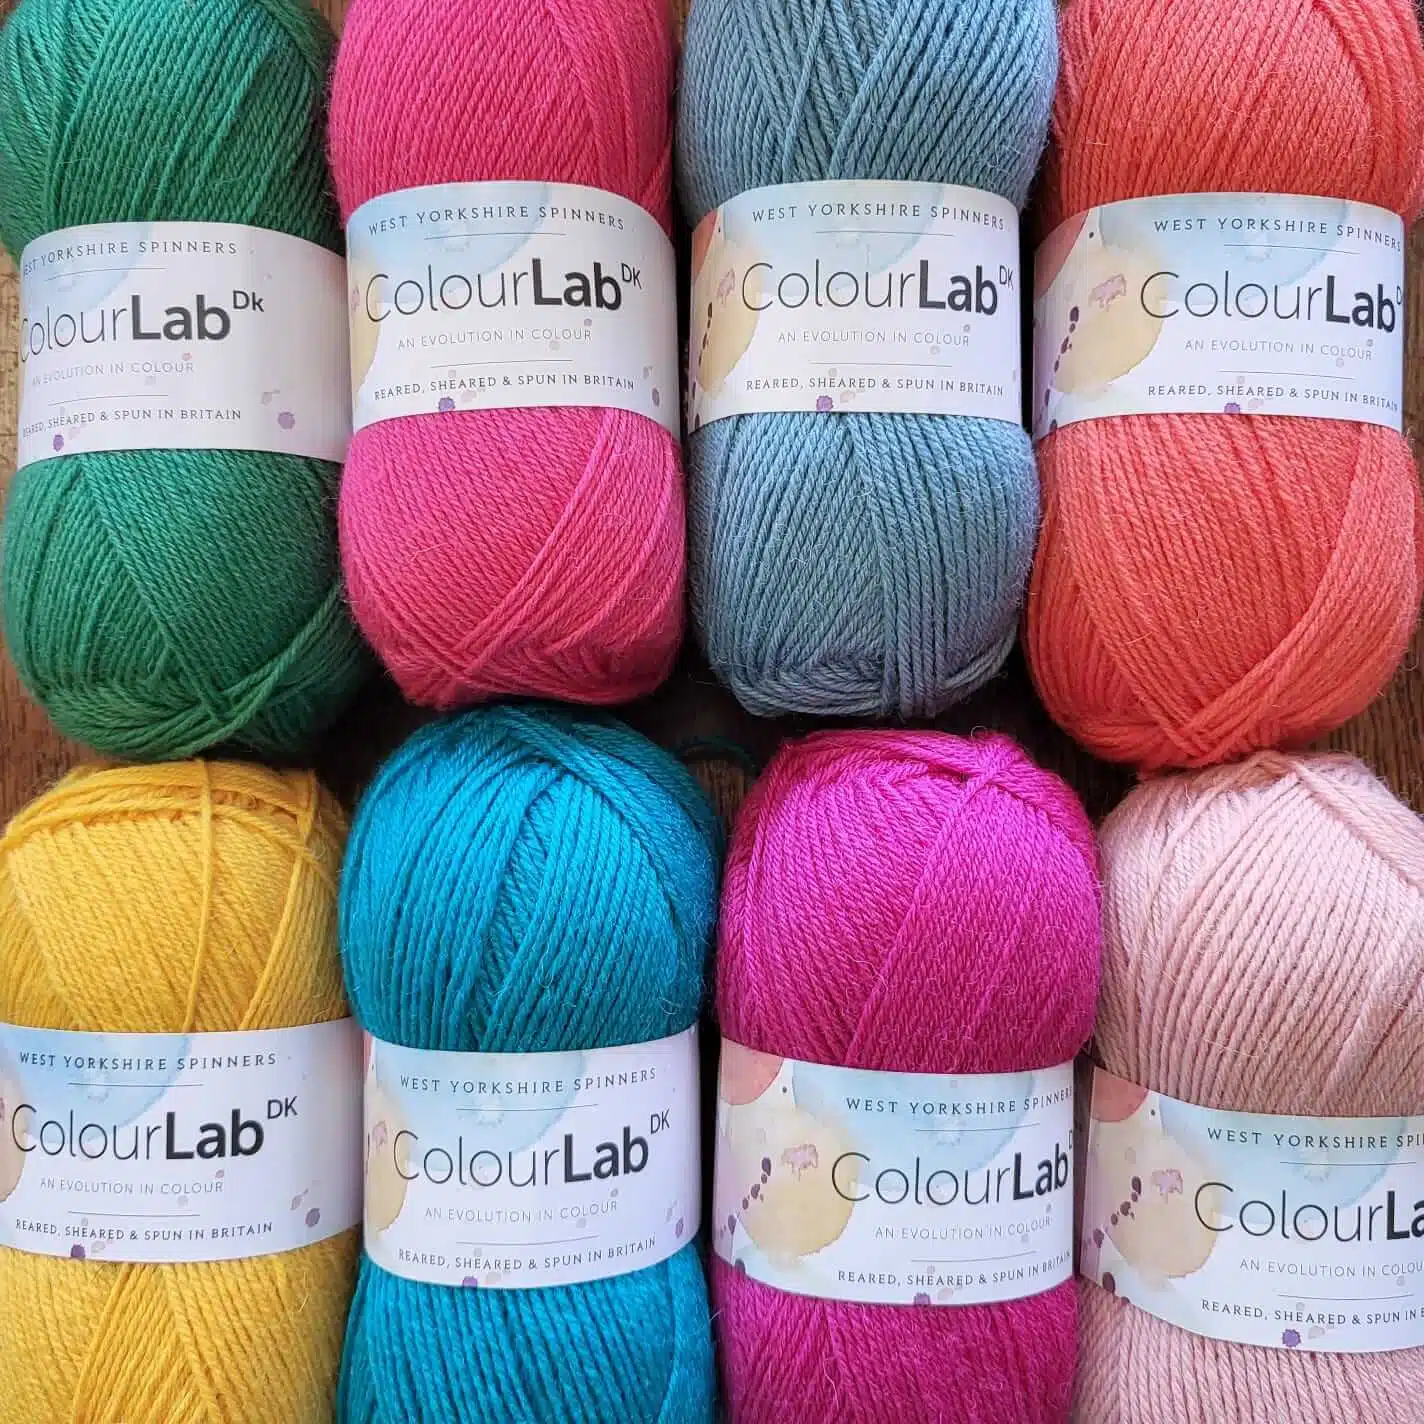 West Yorkshire Spinners Yarn Brand Colour Lab